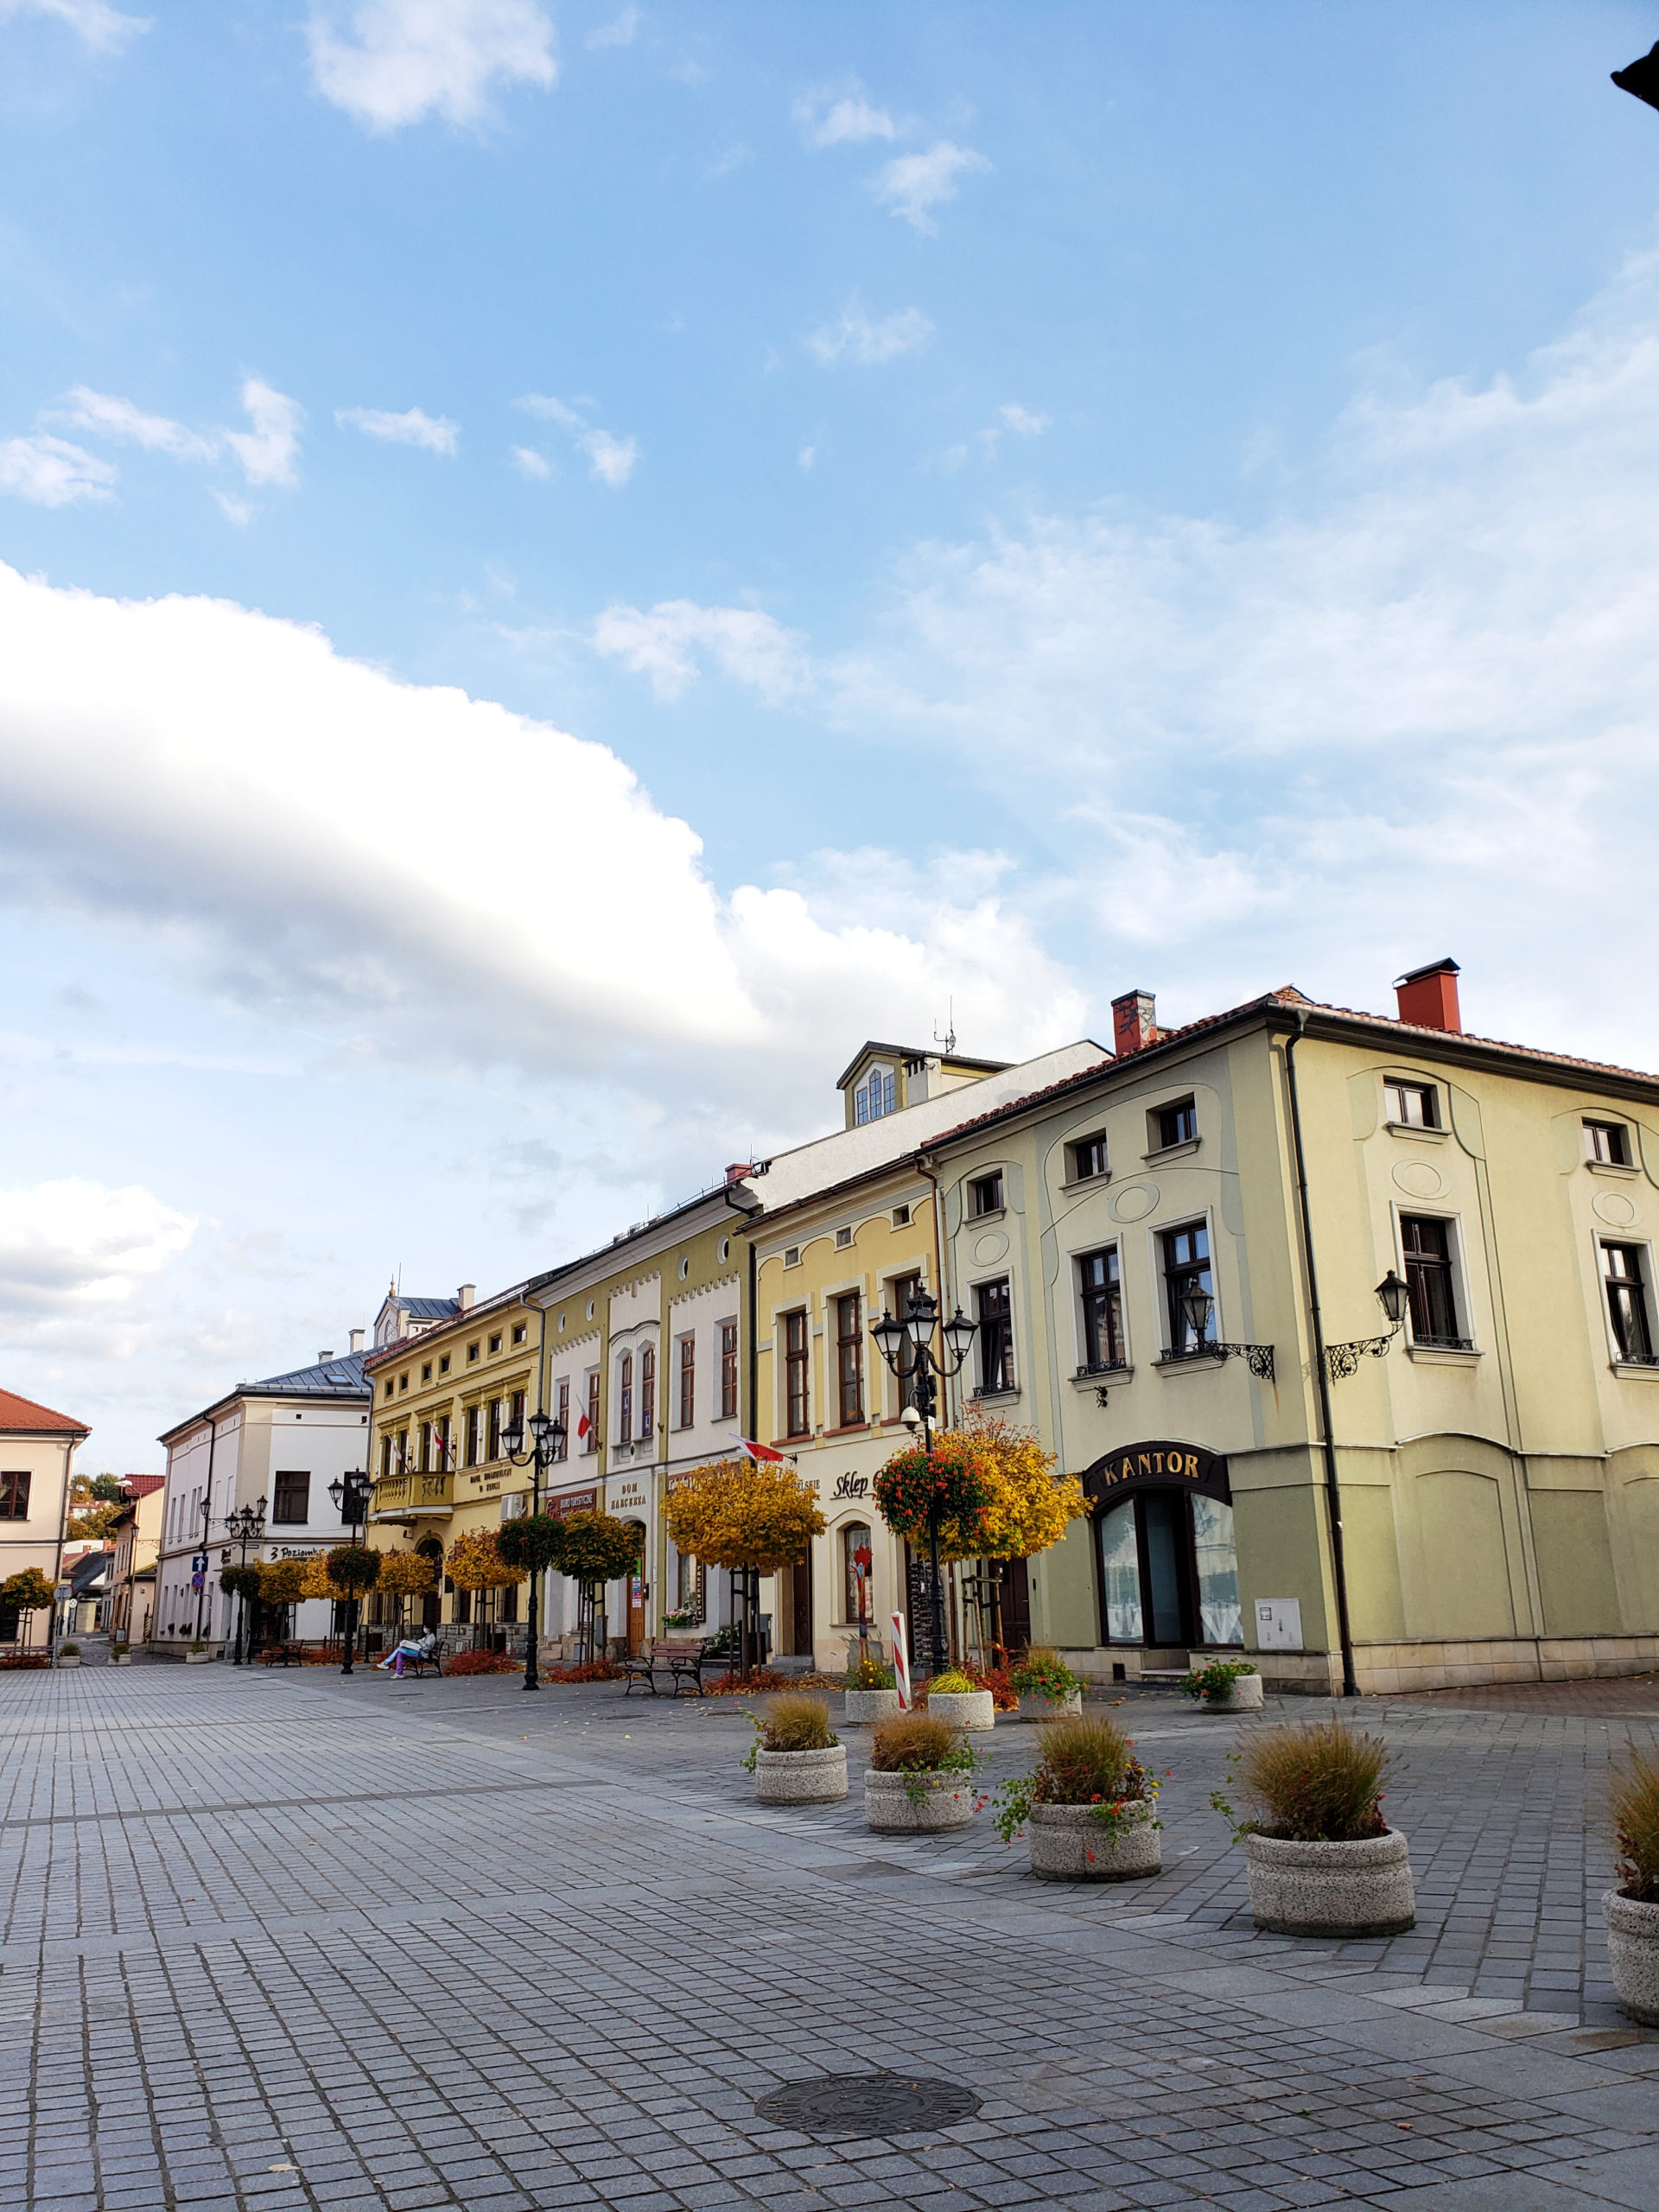 Discover This Hidden Gem In Poland - Welcome To Żywiec